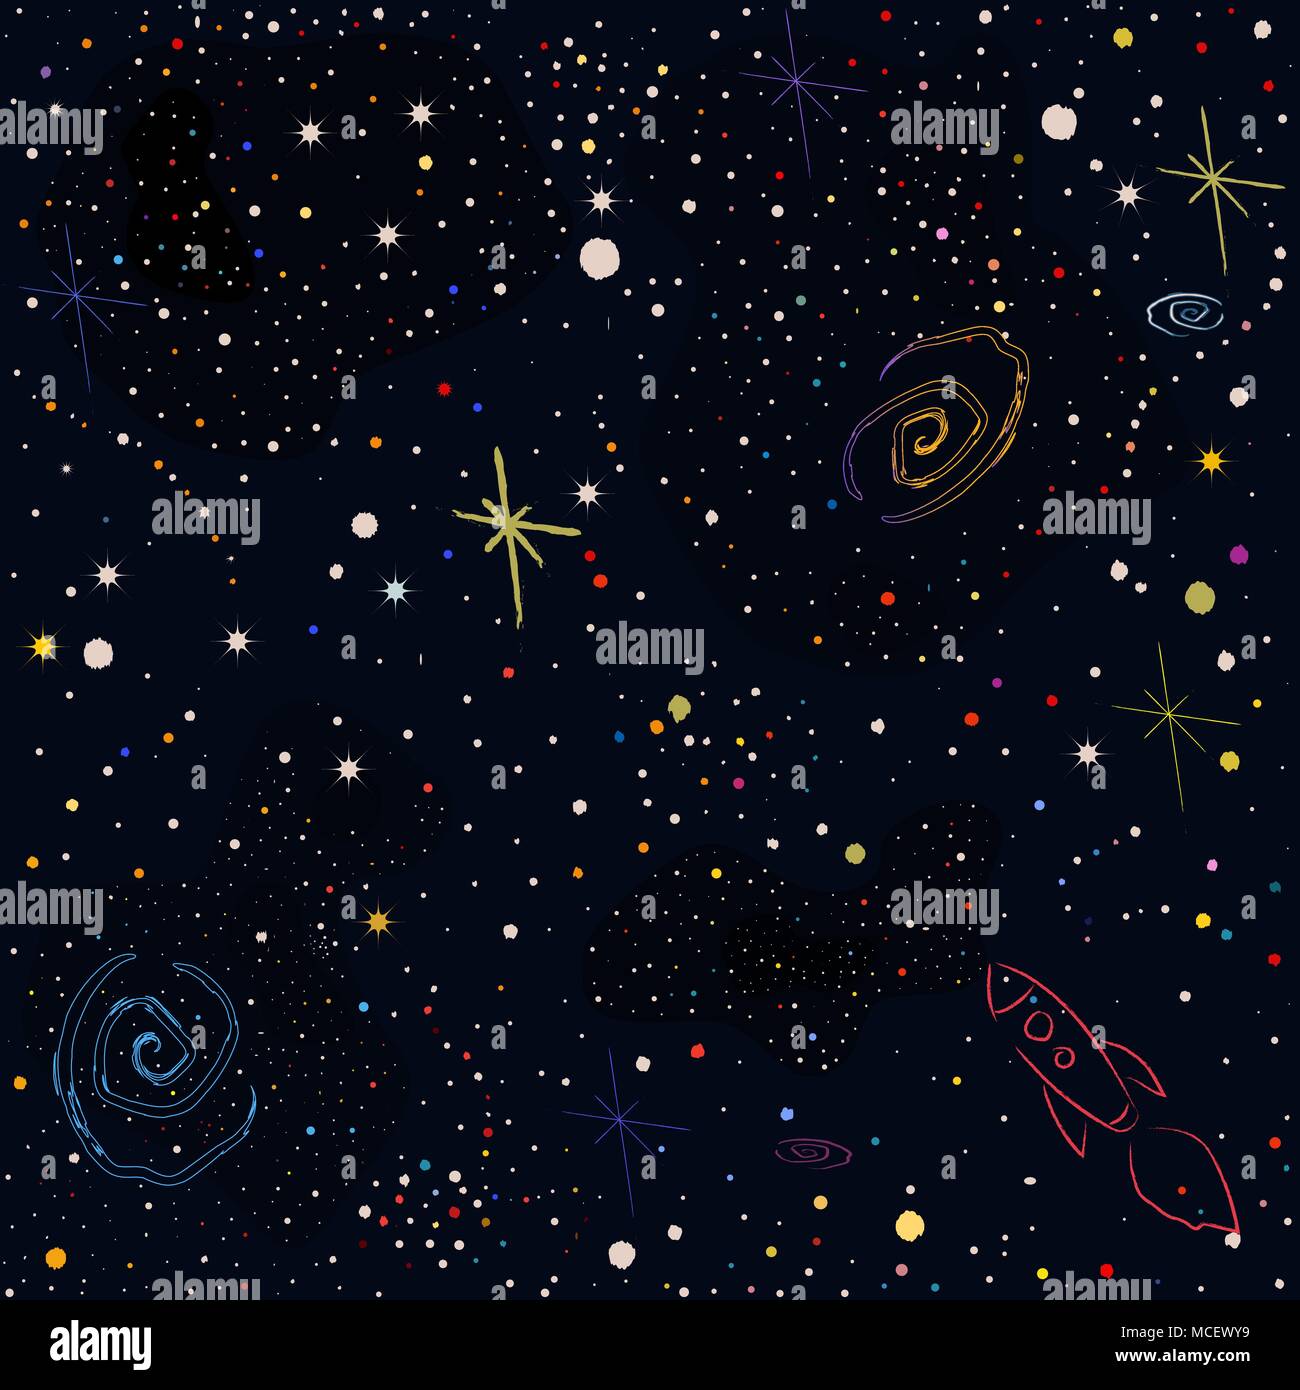 Cosmic Pattern with stars, planets, Moon, rocket, spiral galaxies and constellations in color. Vector Illustration Stock Vector